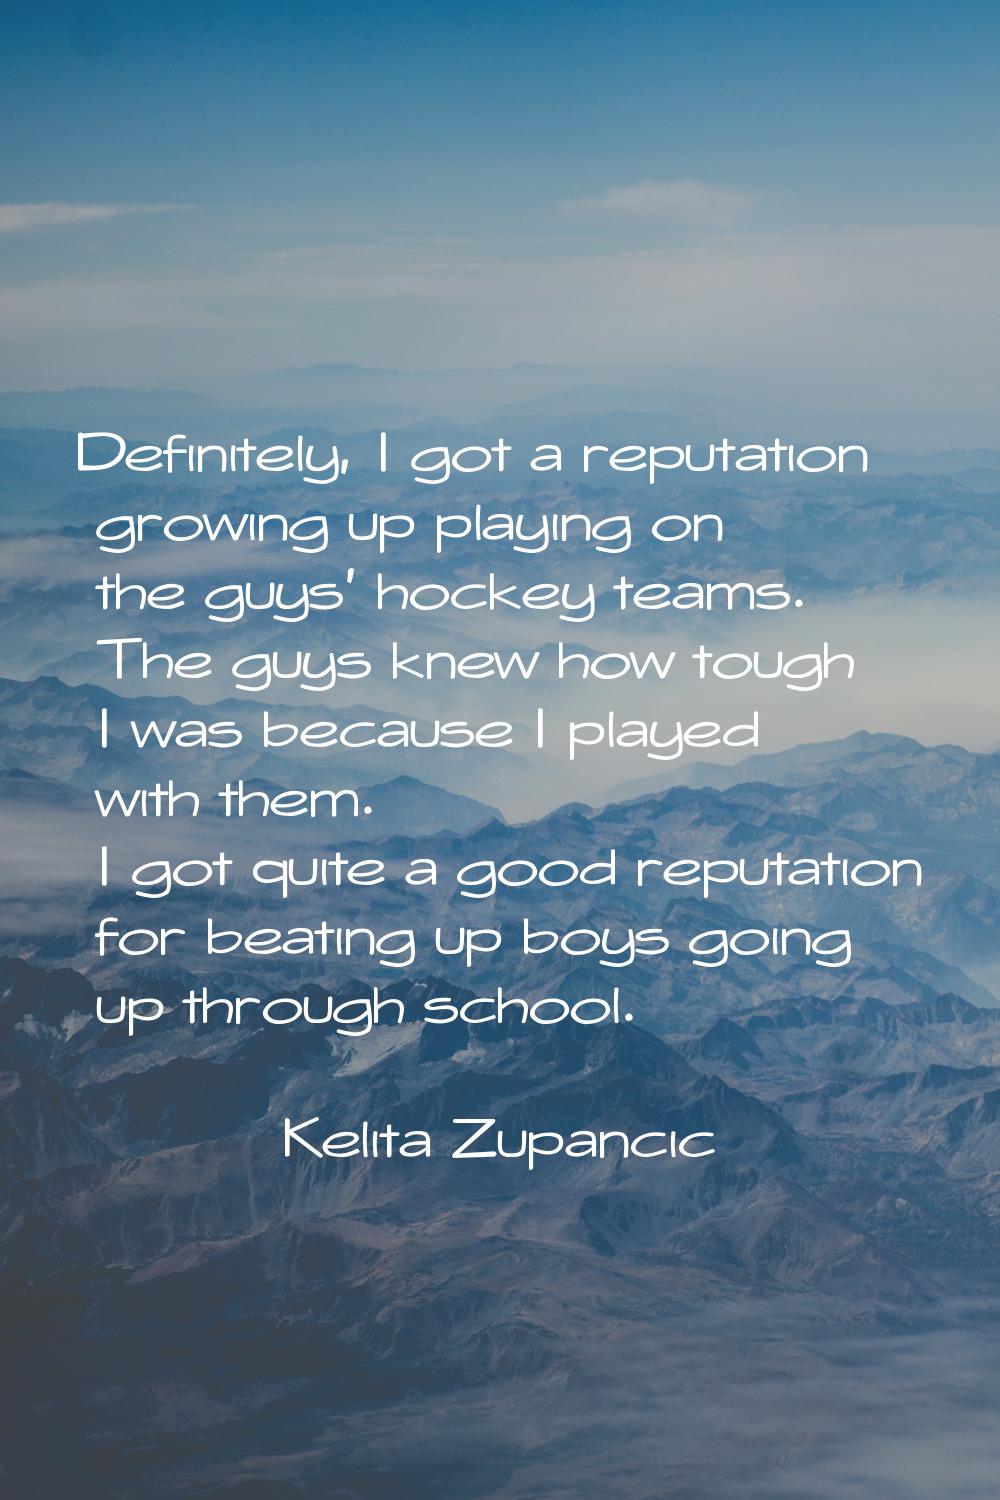 Definitely, I got a reputation growing up playing on the guys' hockey teams. The guys knew how toug